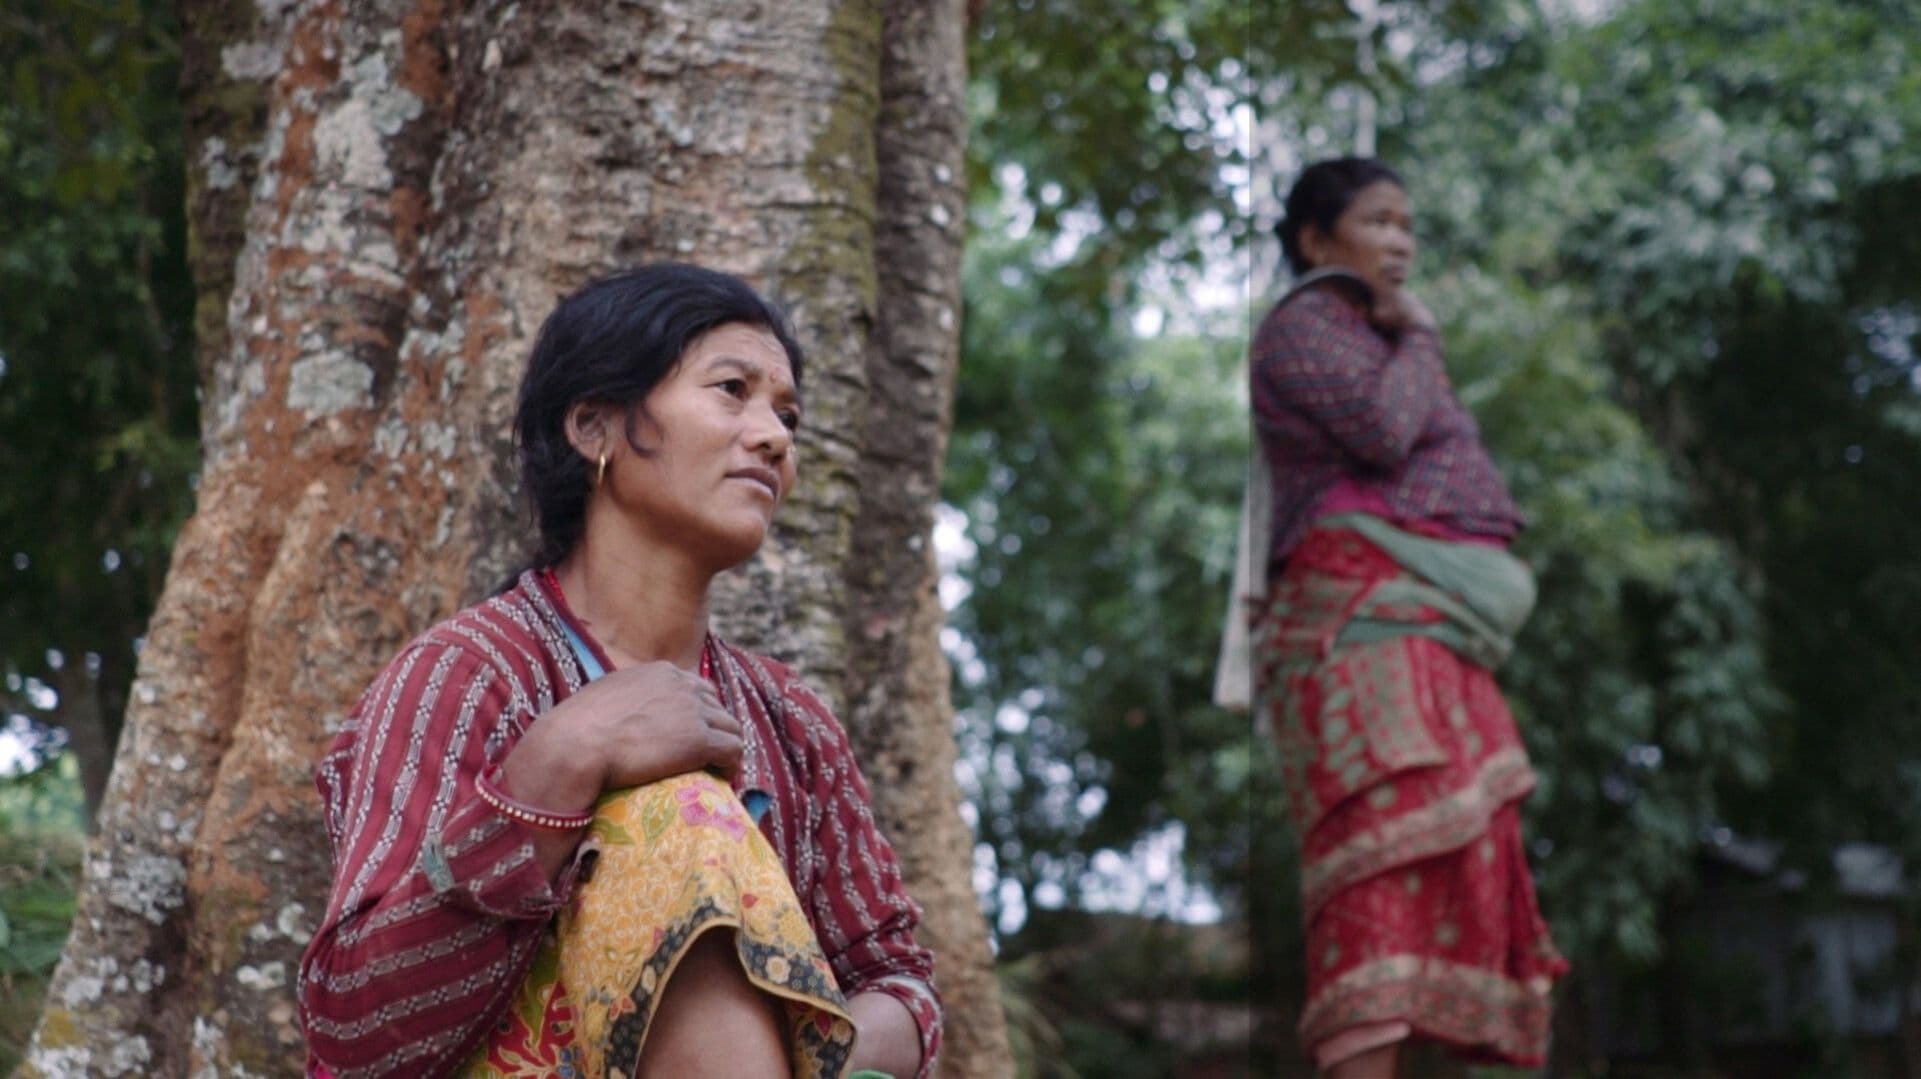 Two filmmakers seek to explain the climate change crisis by showing its human cost in Nepal